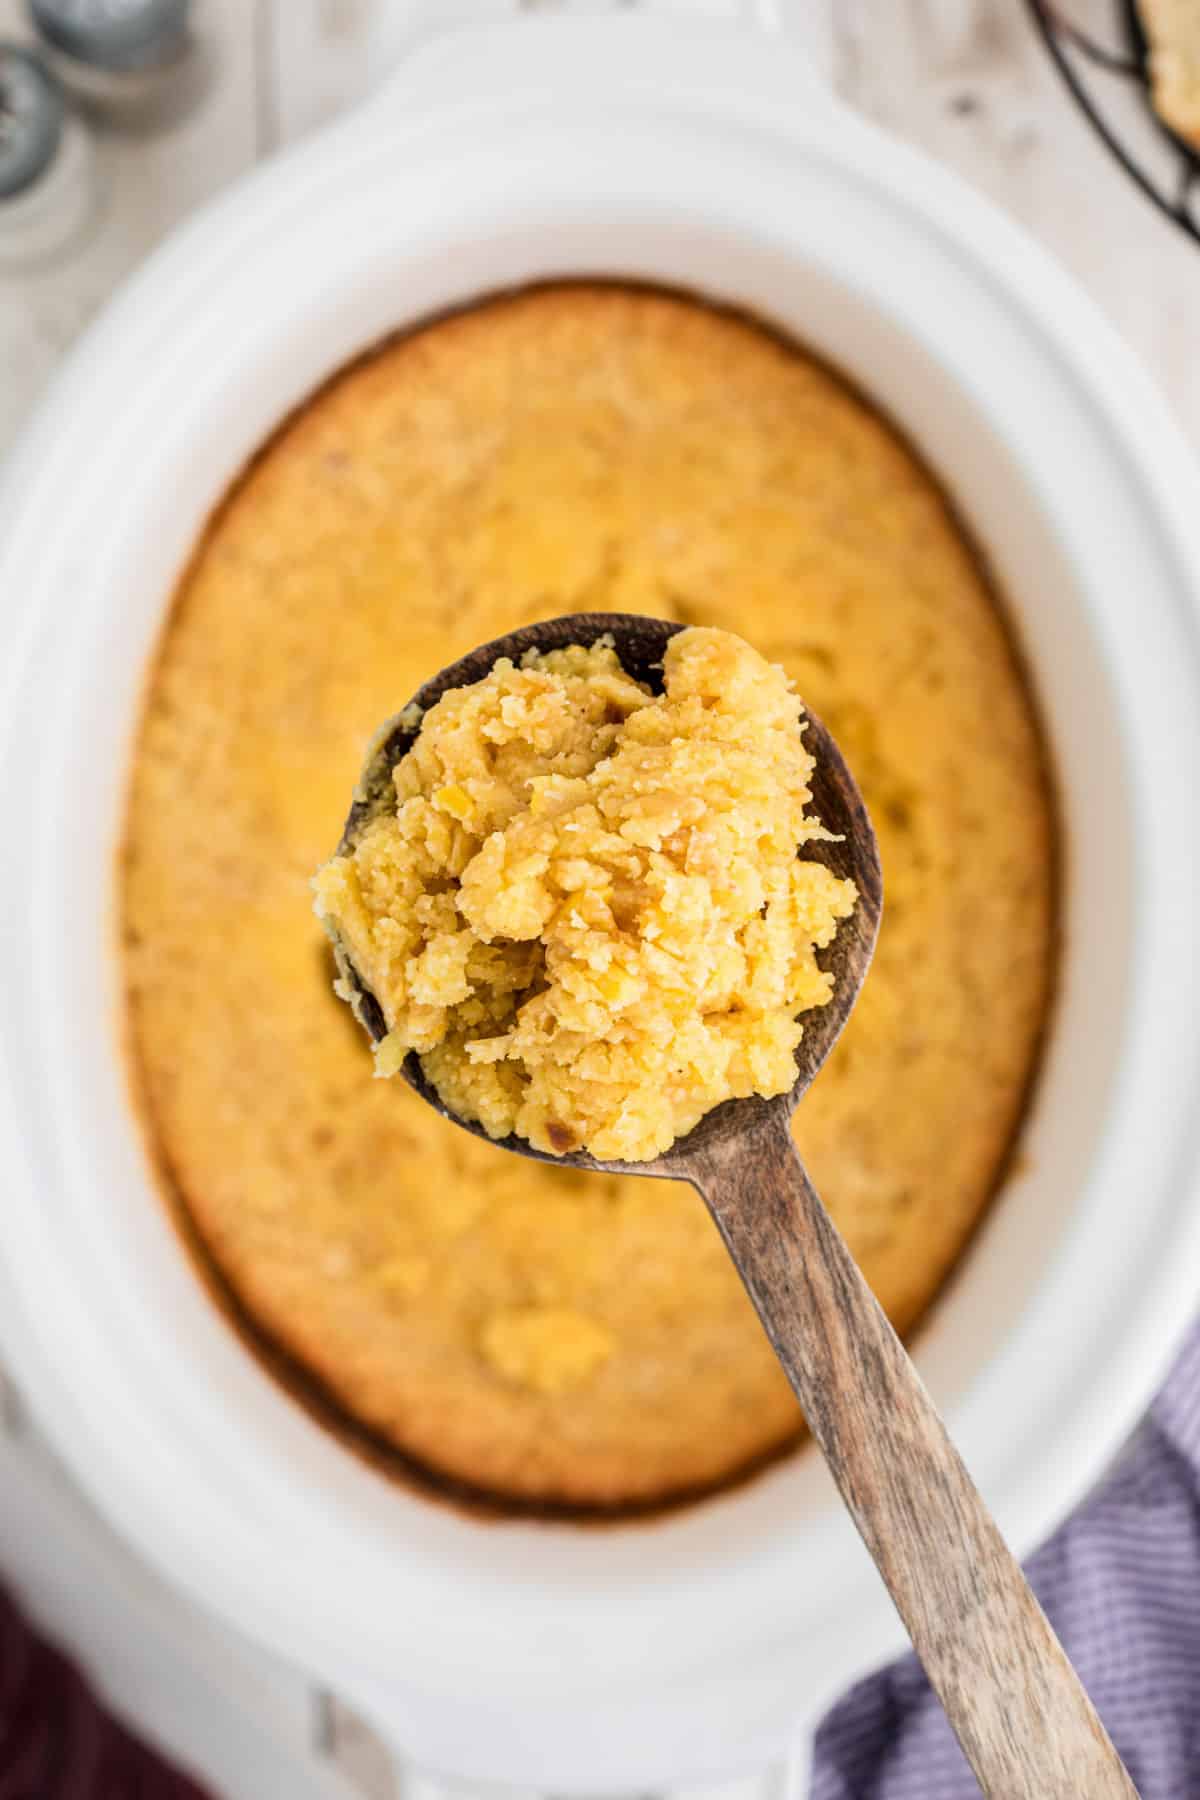 A spoon full of corn casserole being lifted out of a crock pot.